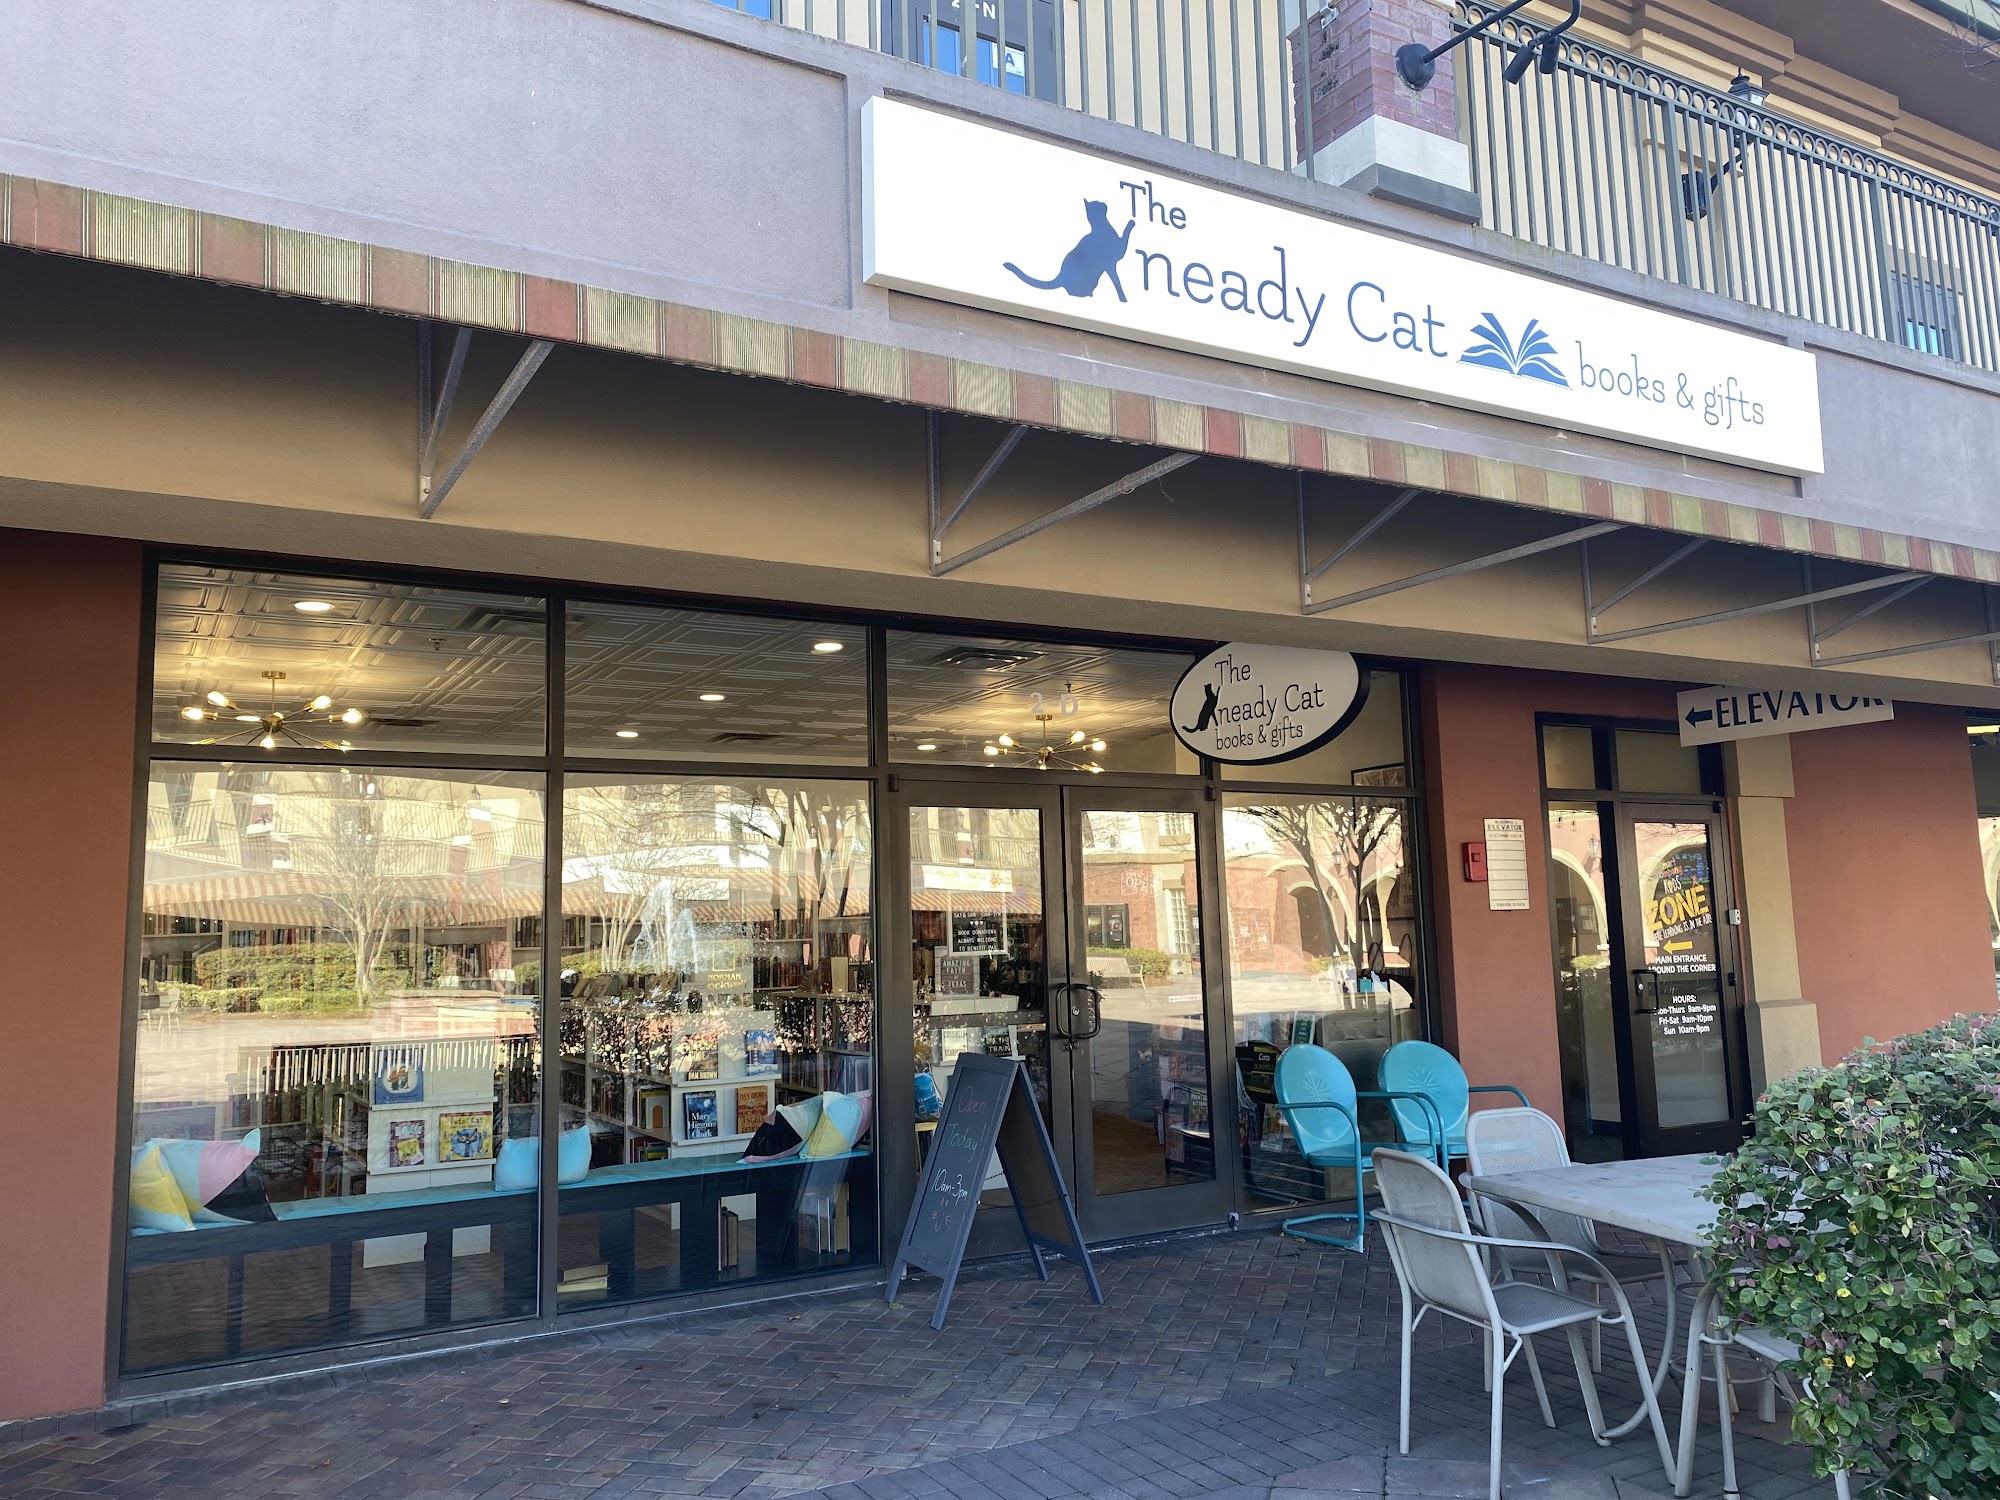 The Kneady Cat Books & Gifts